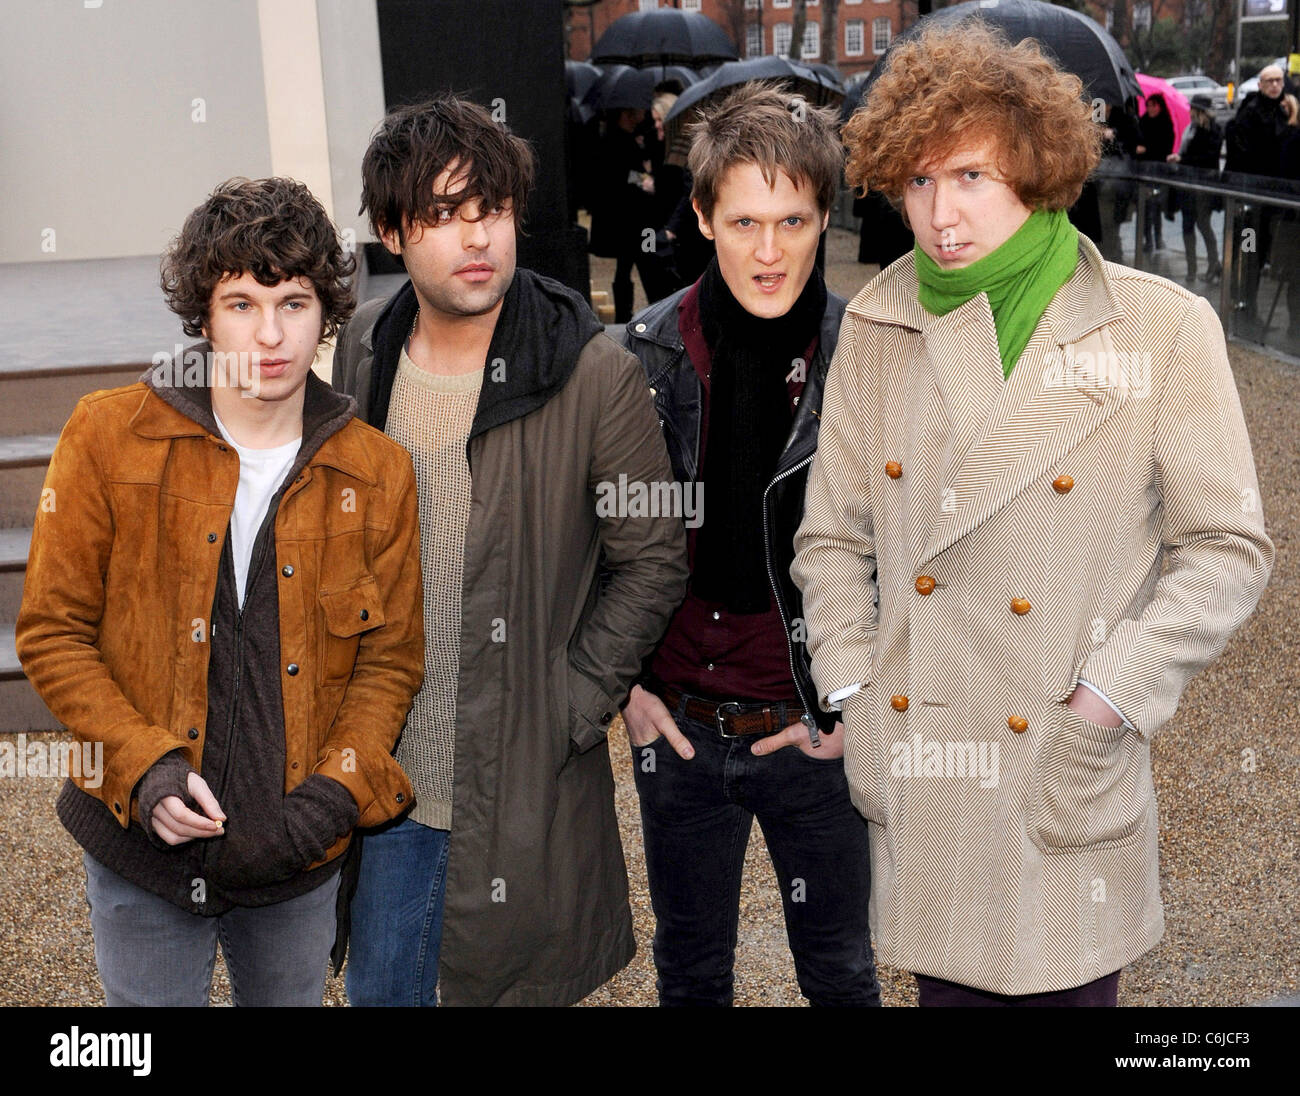 The Kooks London Fashion Week Autumn Winter 2010 - Burberry Prorsum - held at the Chelsea College of Art and Design - Arrivals Stock Photo